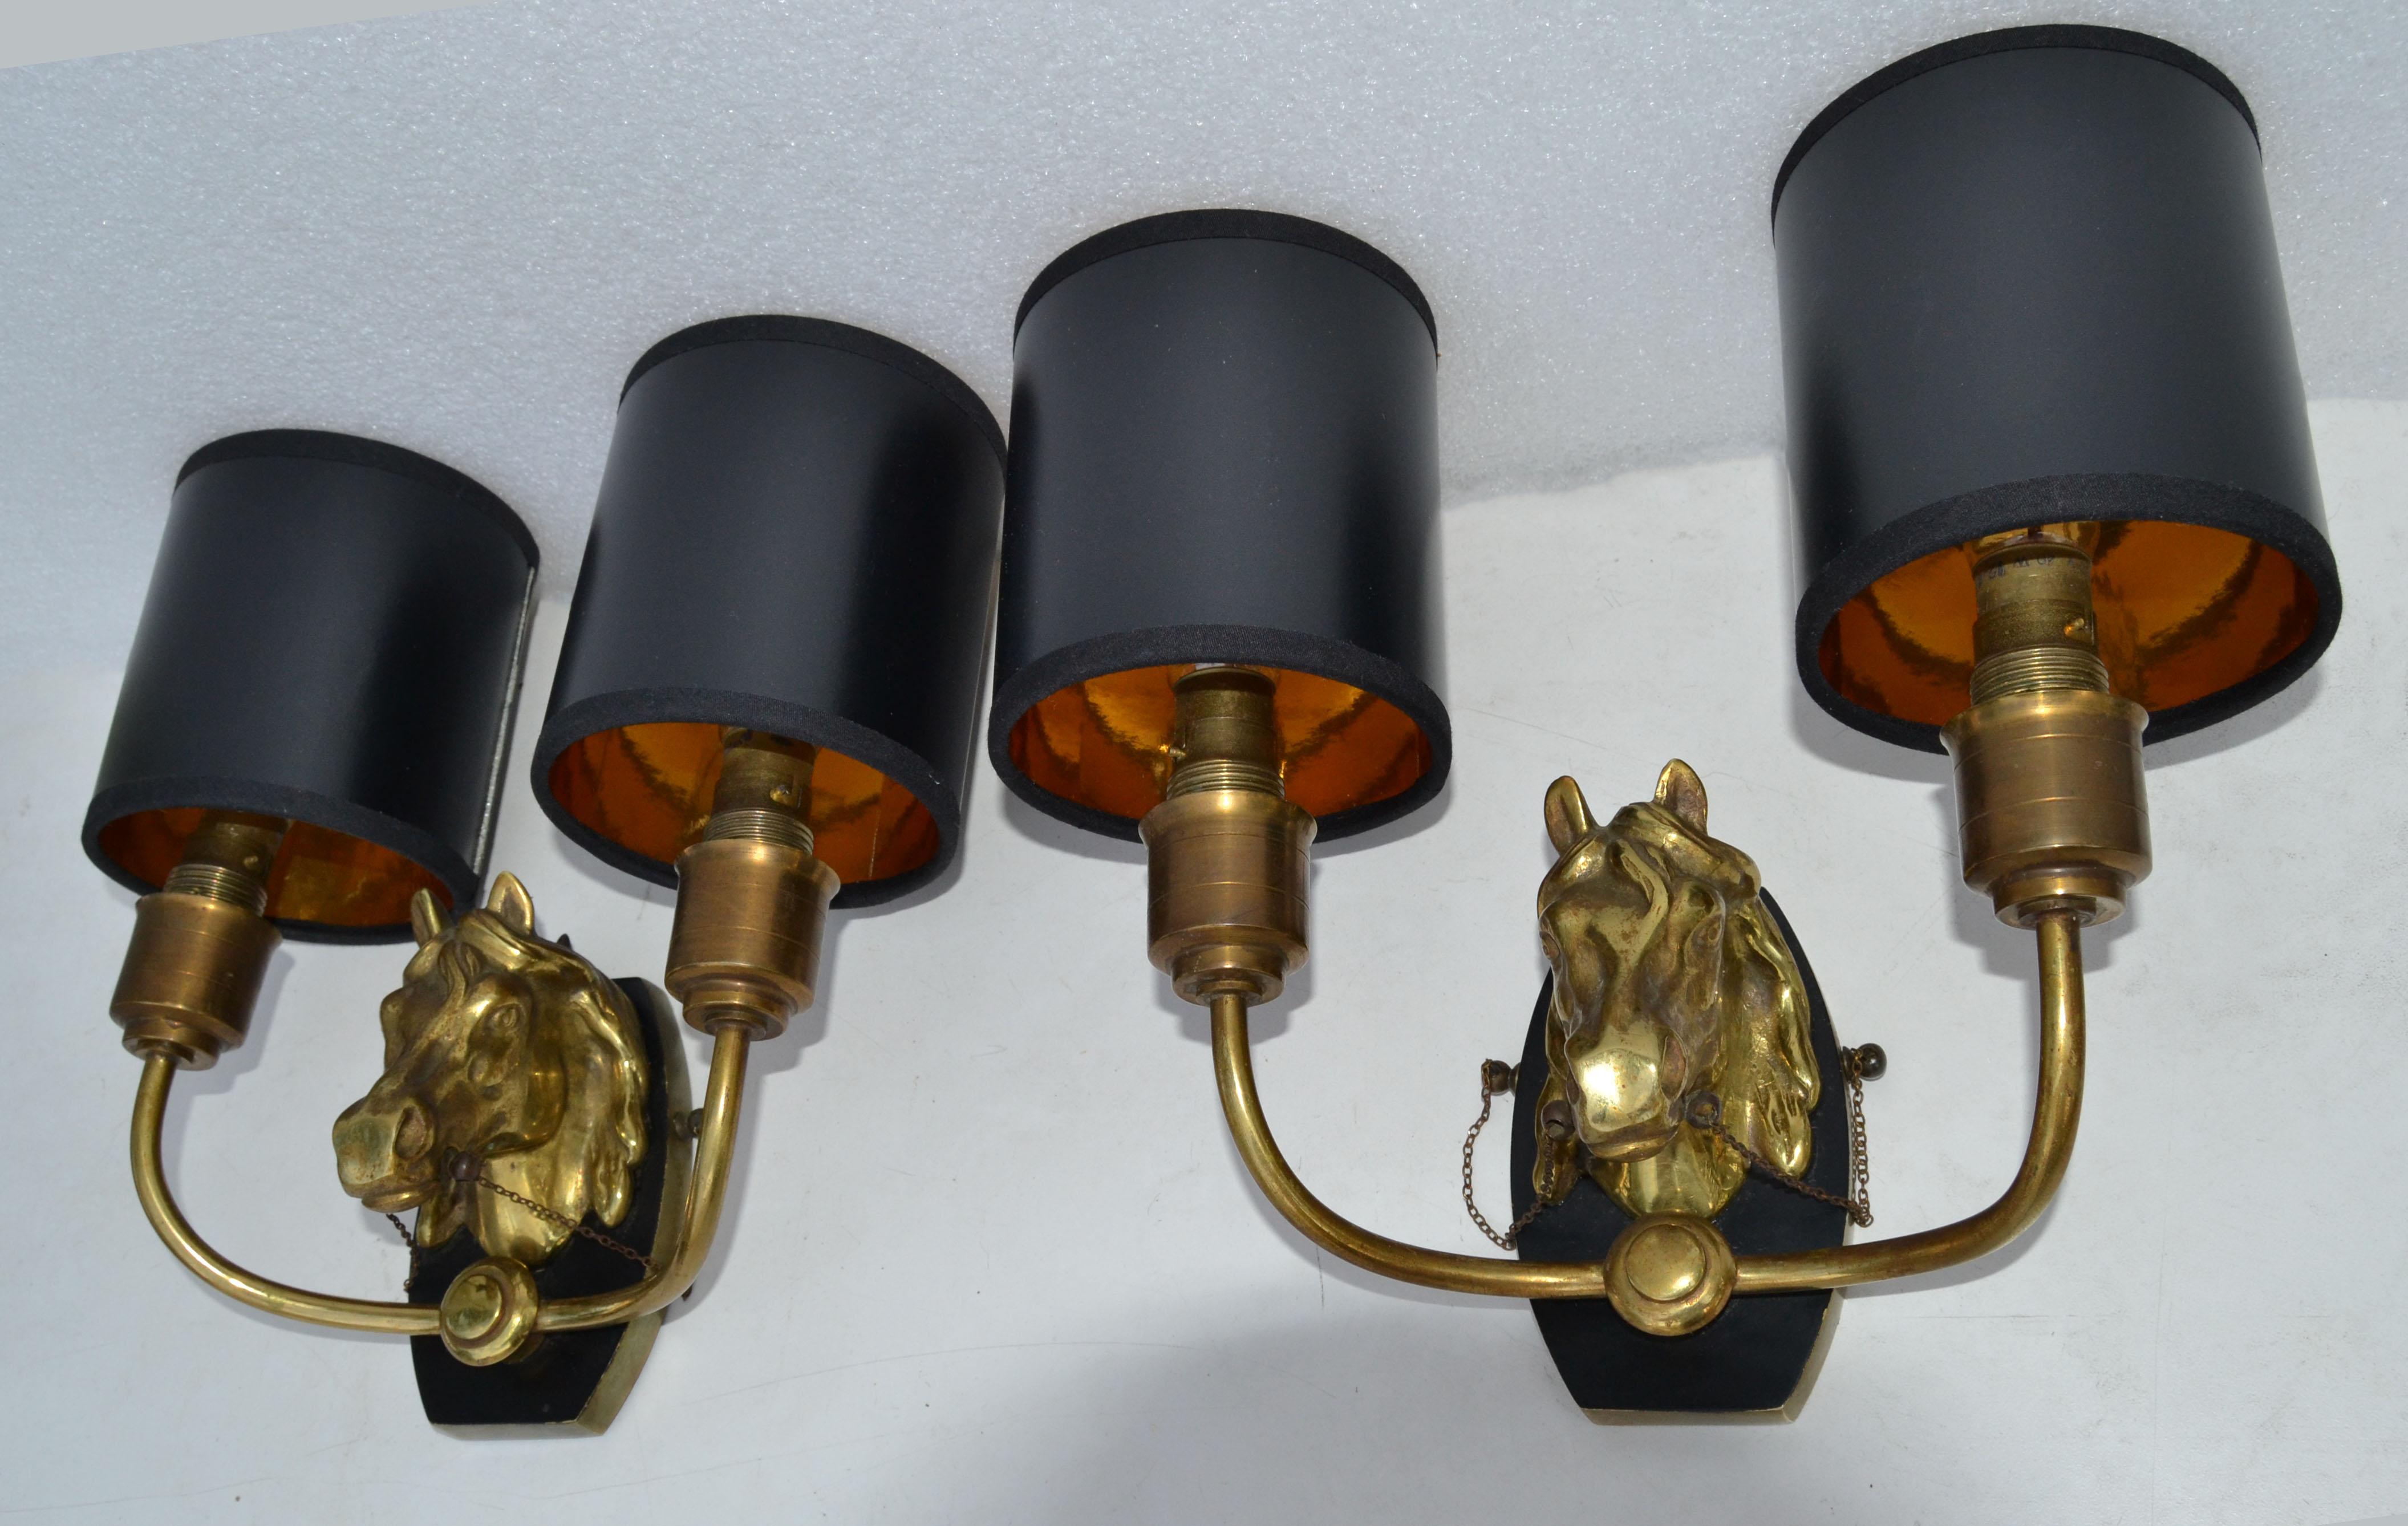 Maison Baguès 2 Arm Horse Head Sconces Wall Lights French Neoclassical 1950 Pair 1